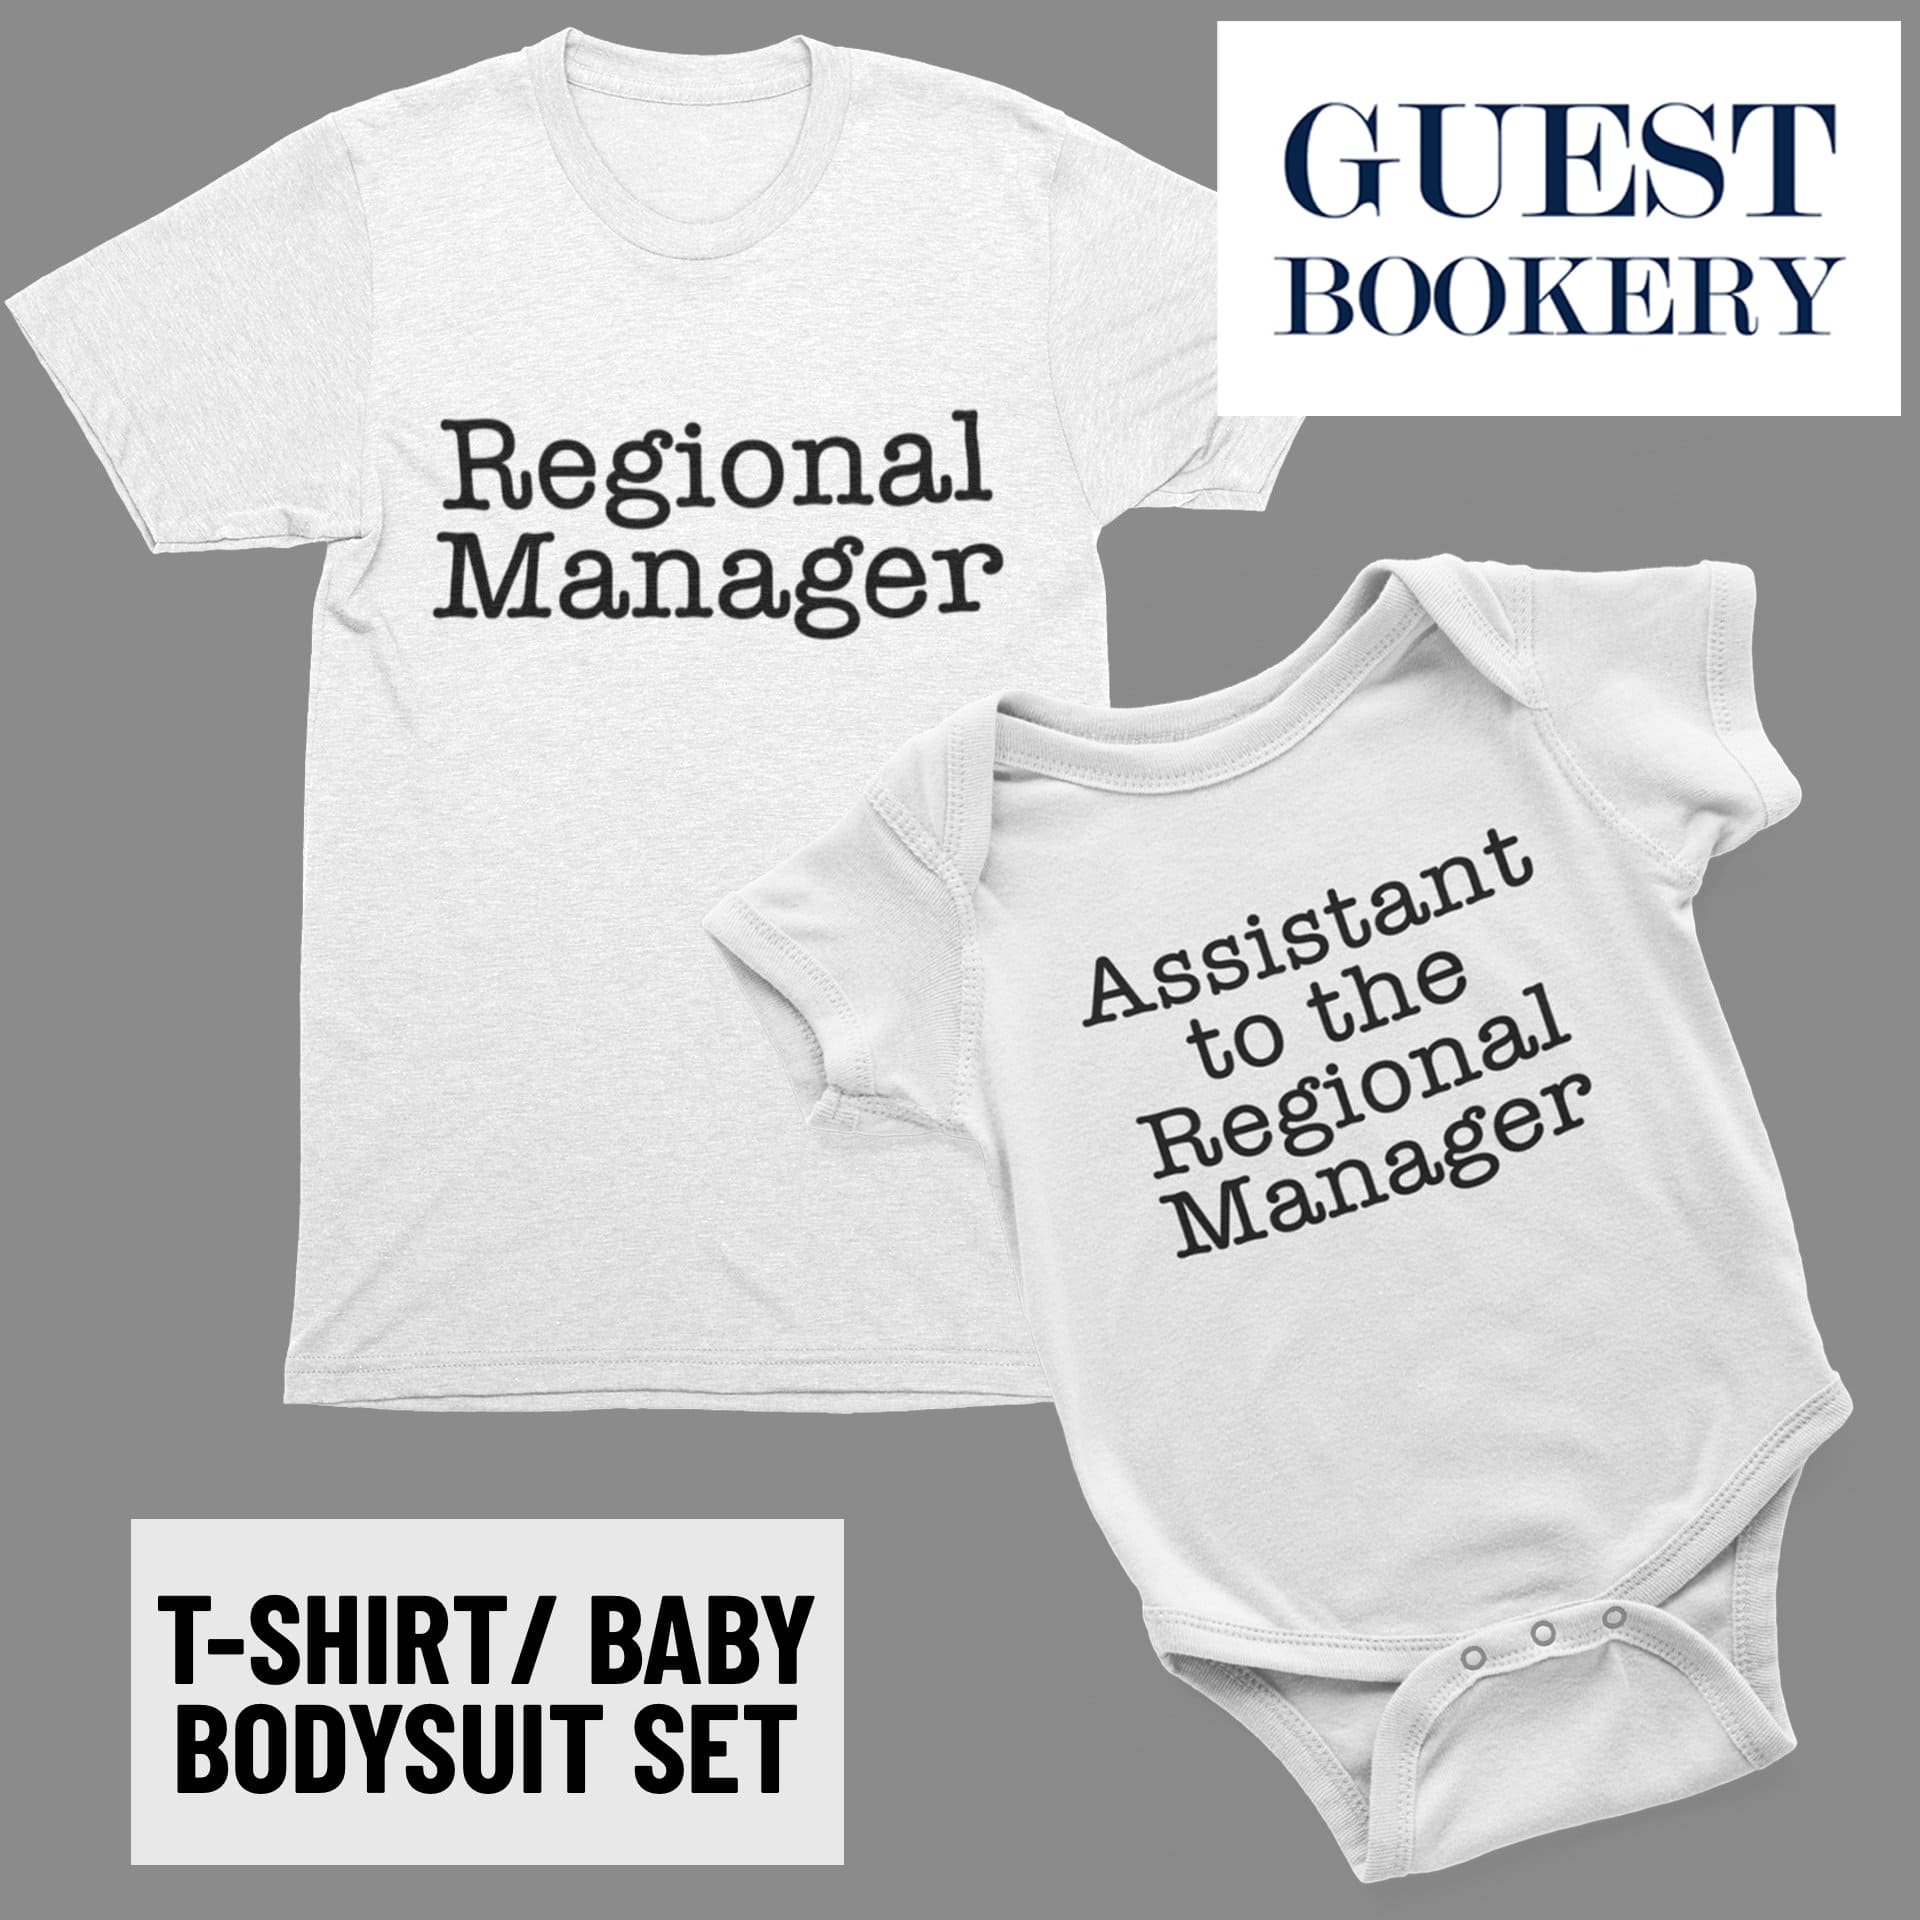 Regional Manager T-Shirt and Assistant to the Regional Manager Baby Bodysuit Set